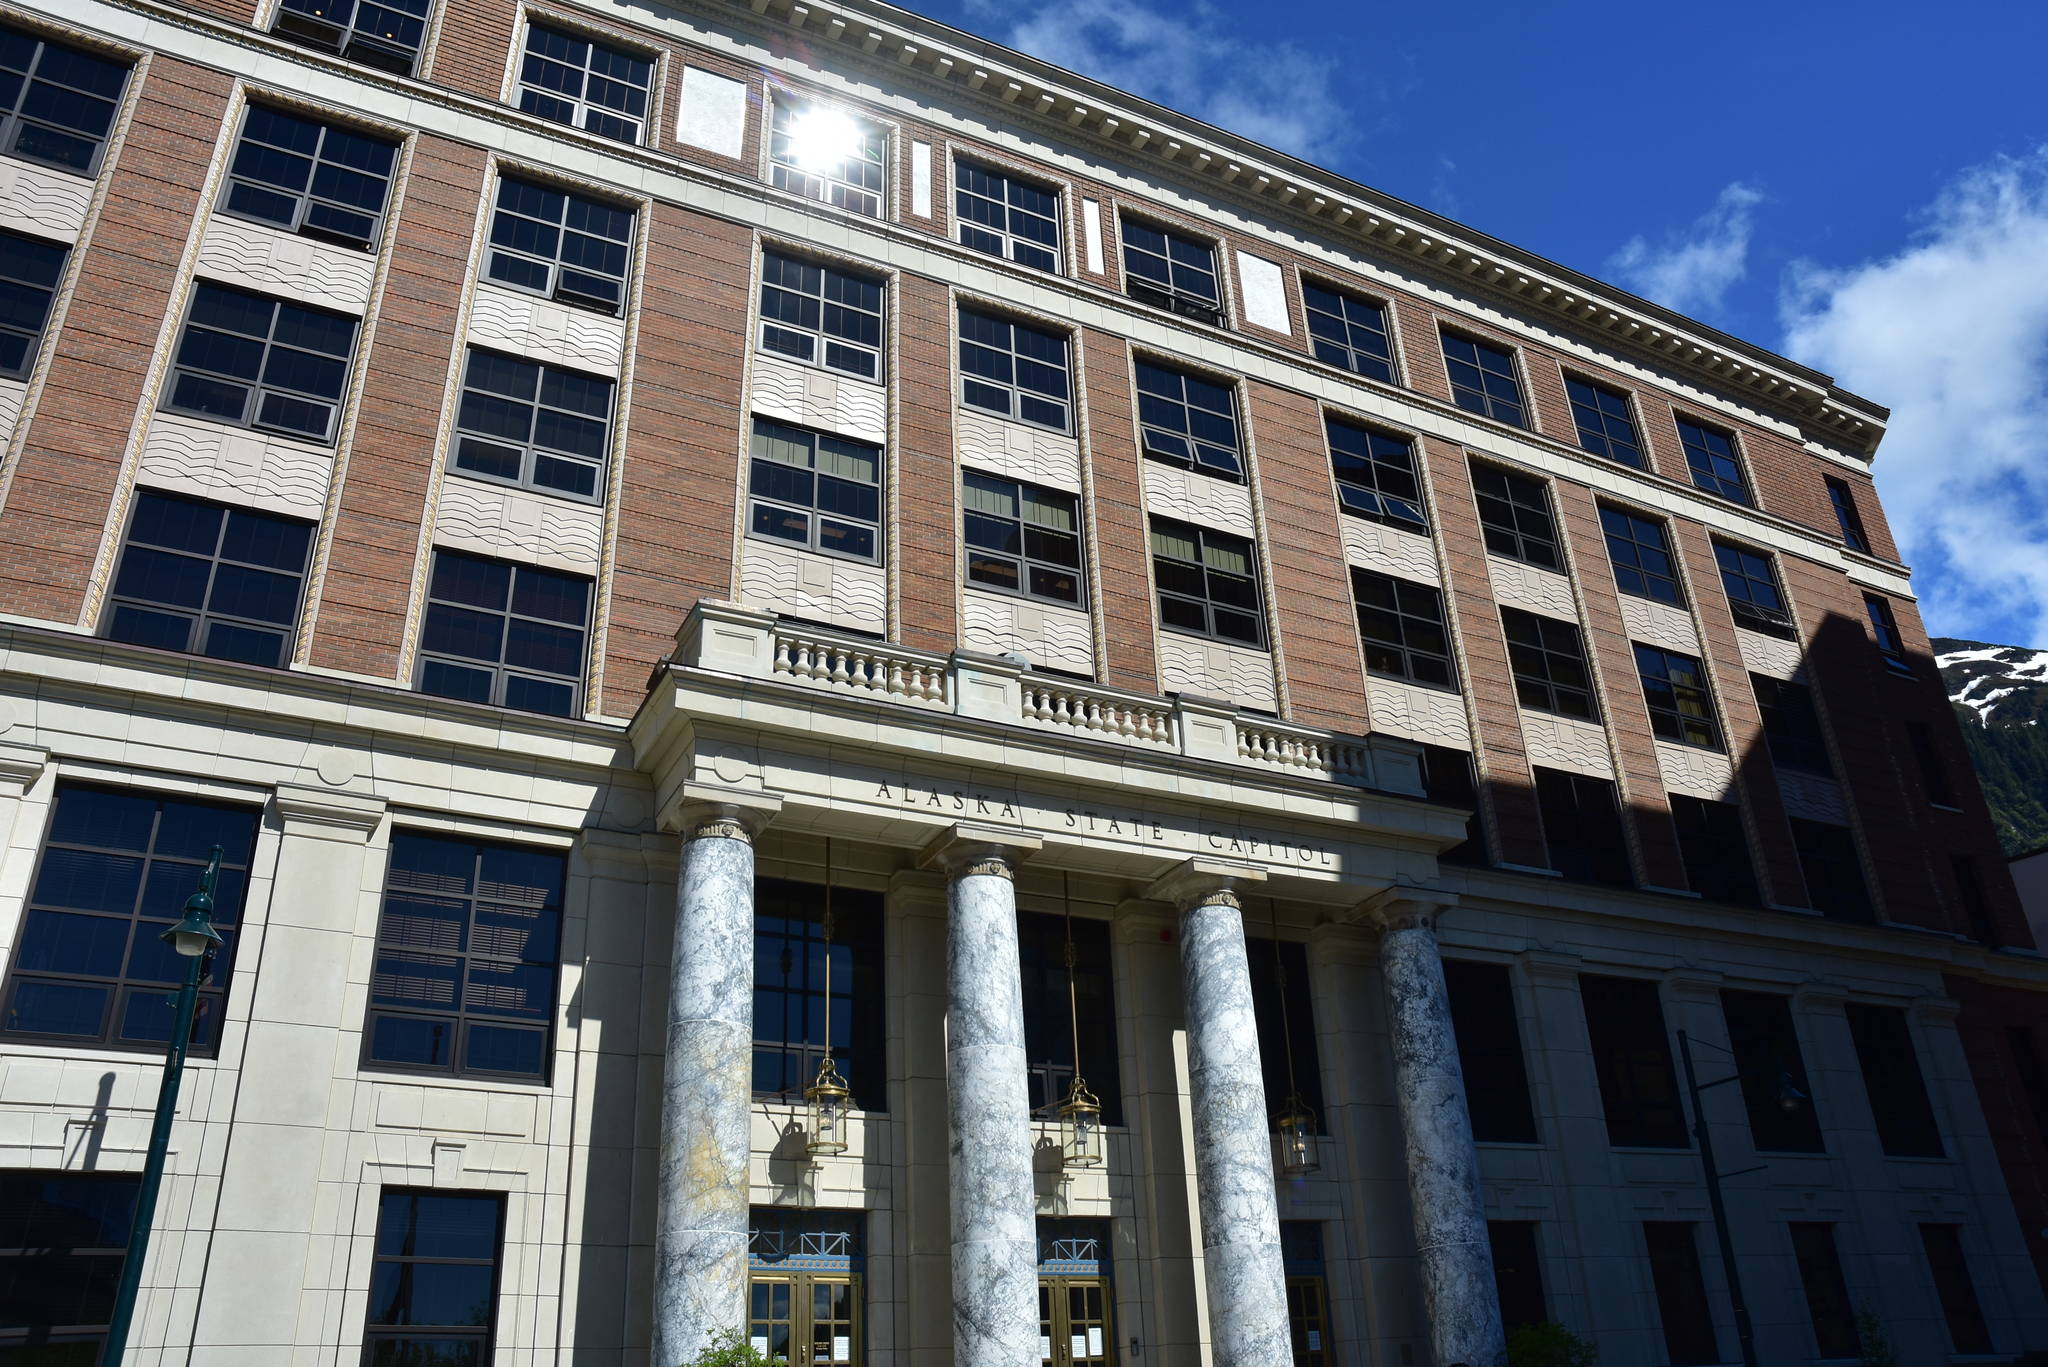 Without a budget to vote on, many lawmakers were absent from the Alaska State Capitol on Monday, June 7, 2021, as negotiations continue in committee. But even the conference committee isn’t scheduled until later in the week as deep divisions among lawmakers remain. (Peter Segall / Juneau Empire)